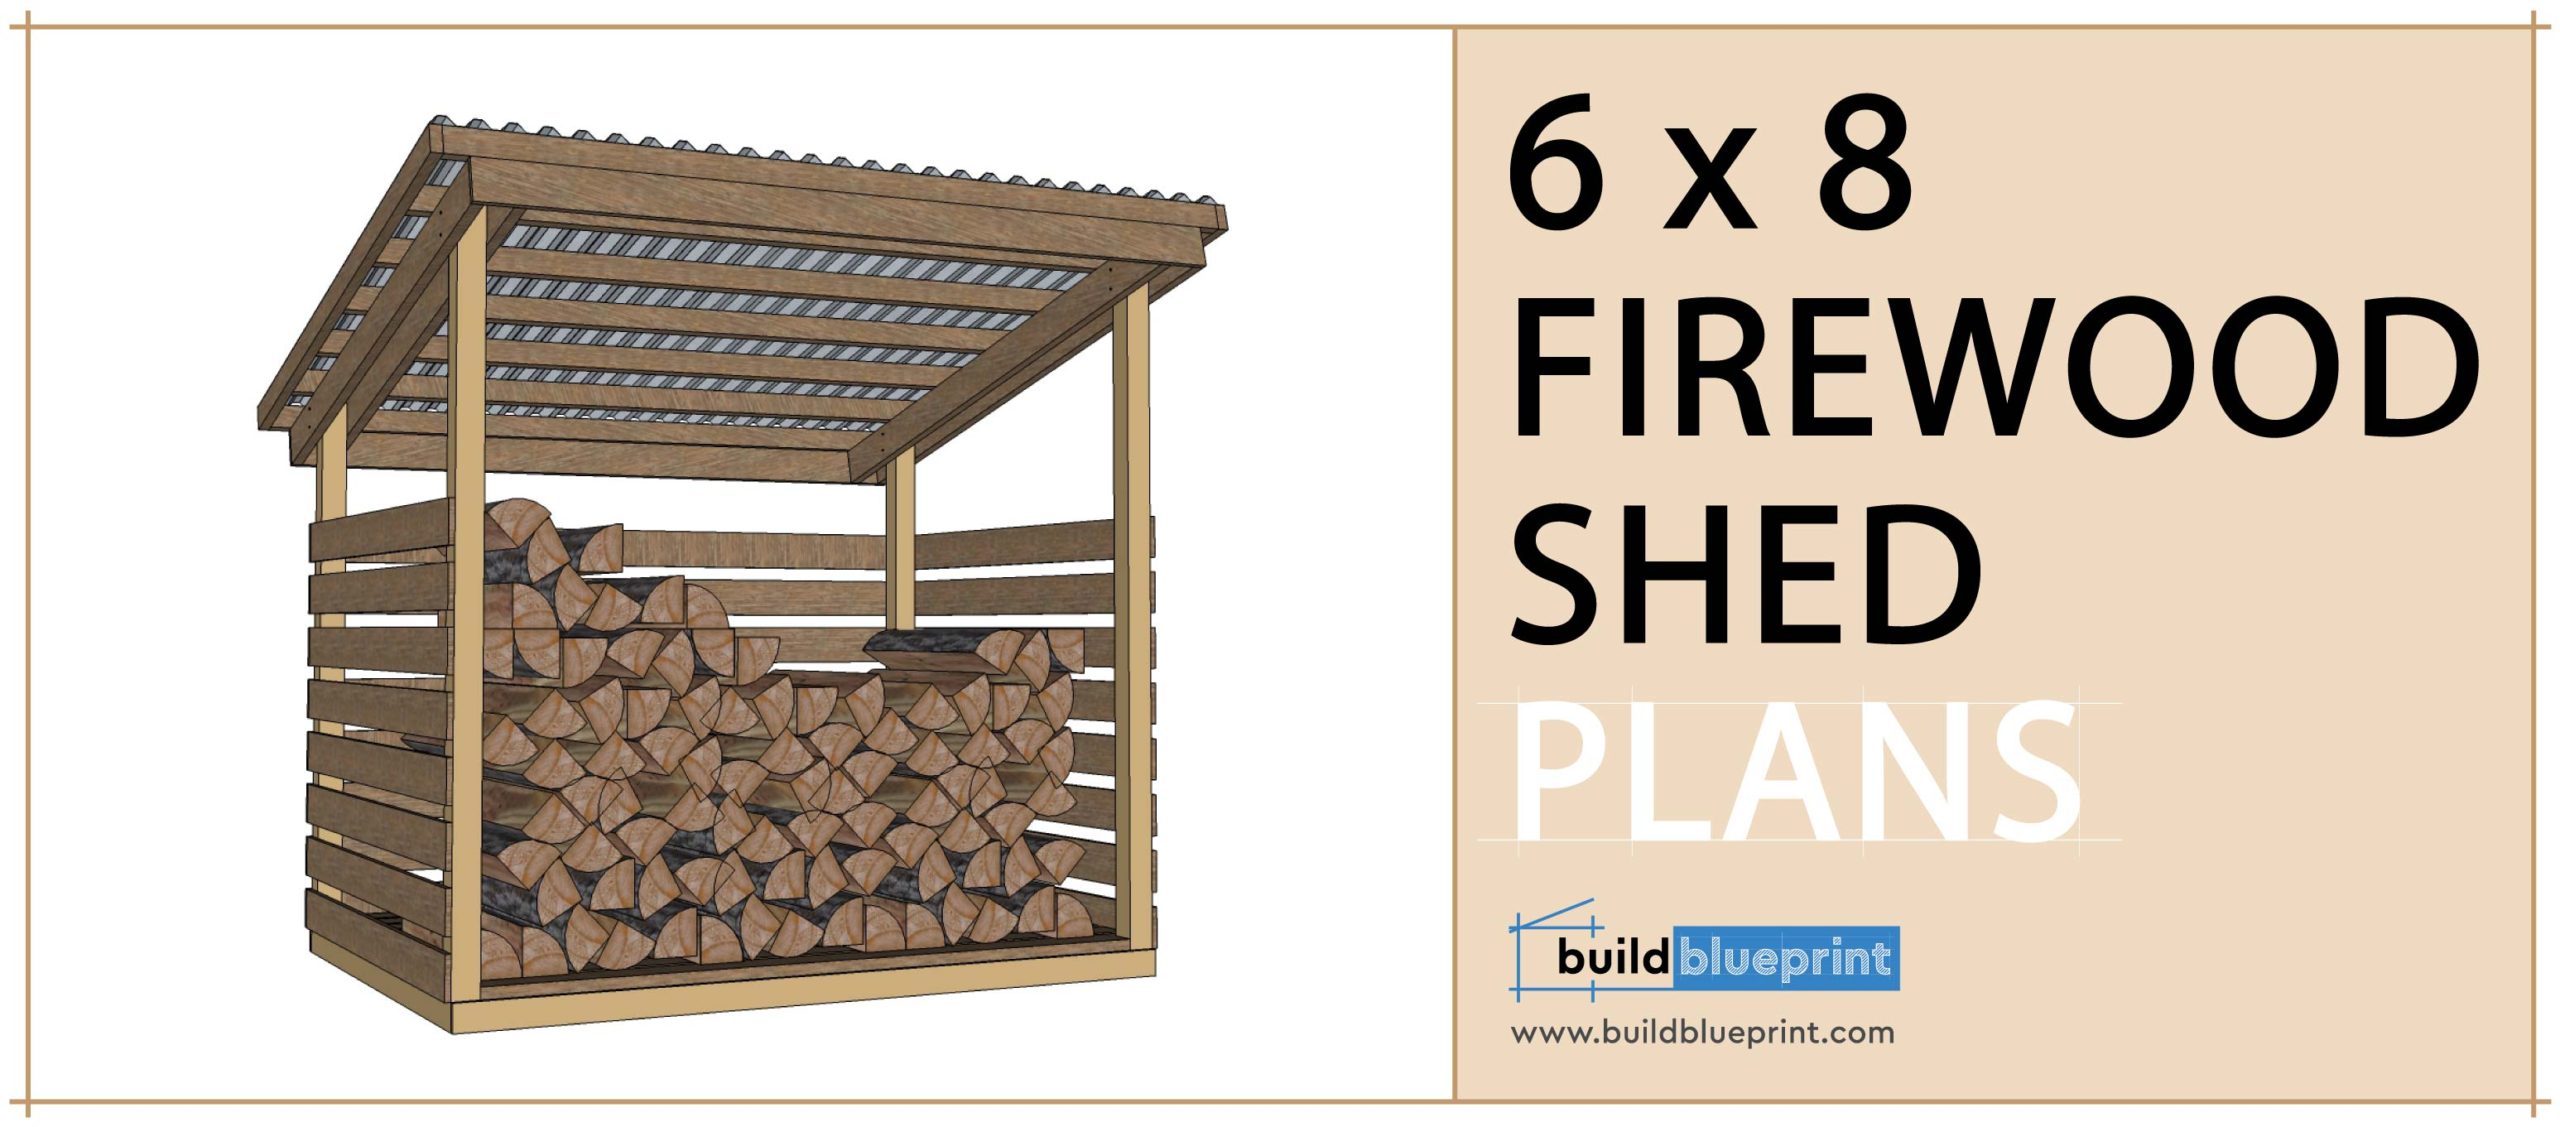 6x8 firewood shed plans